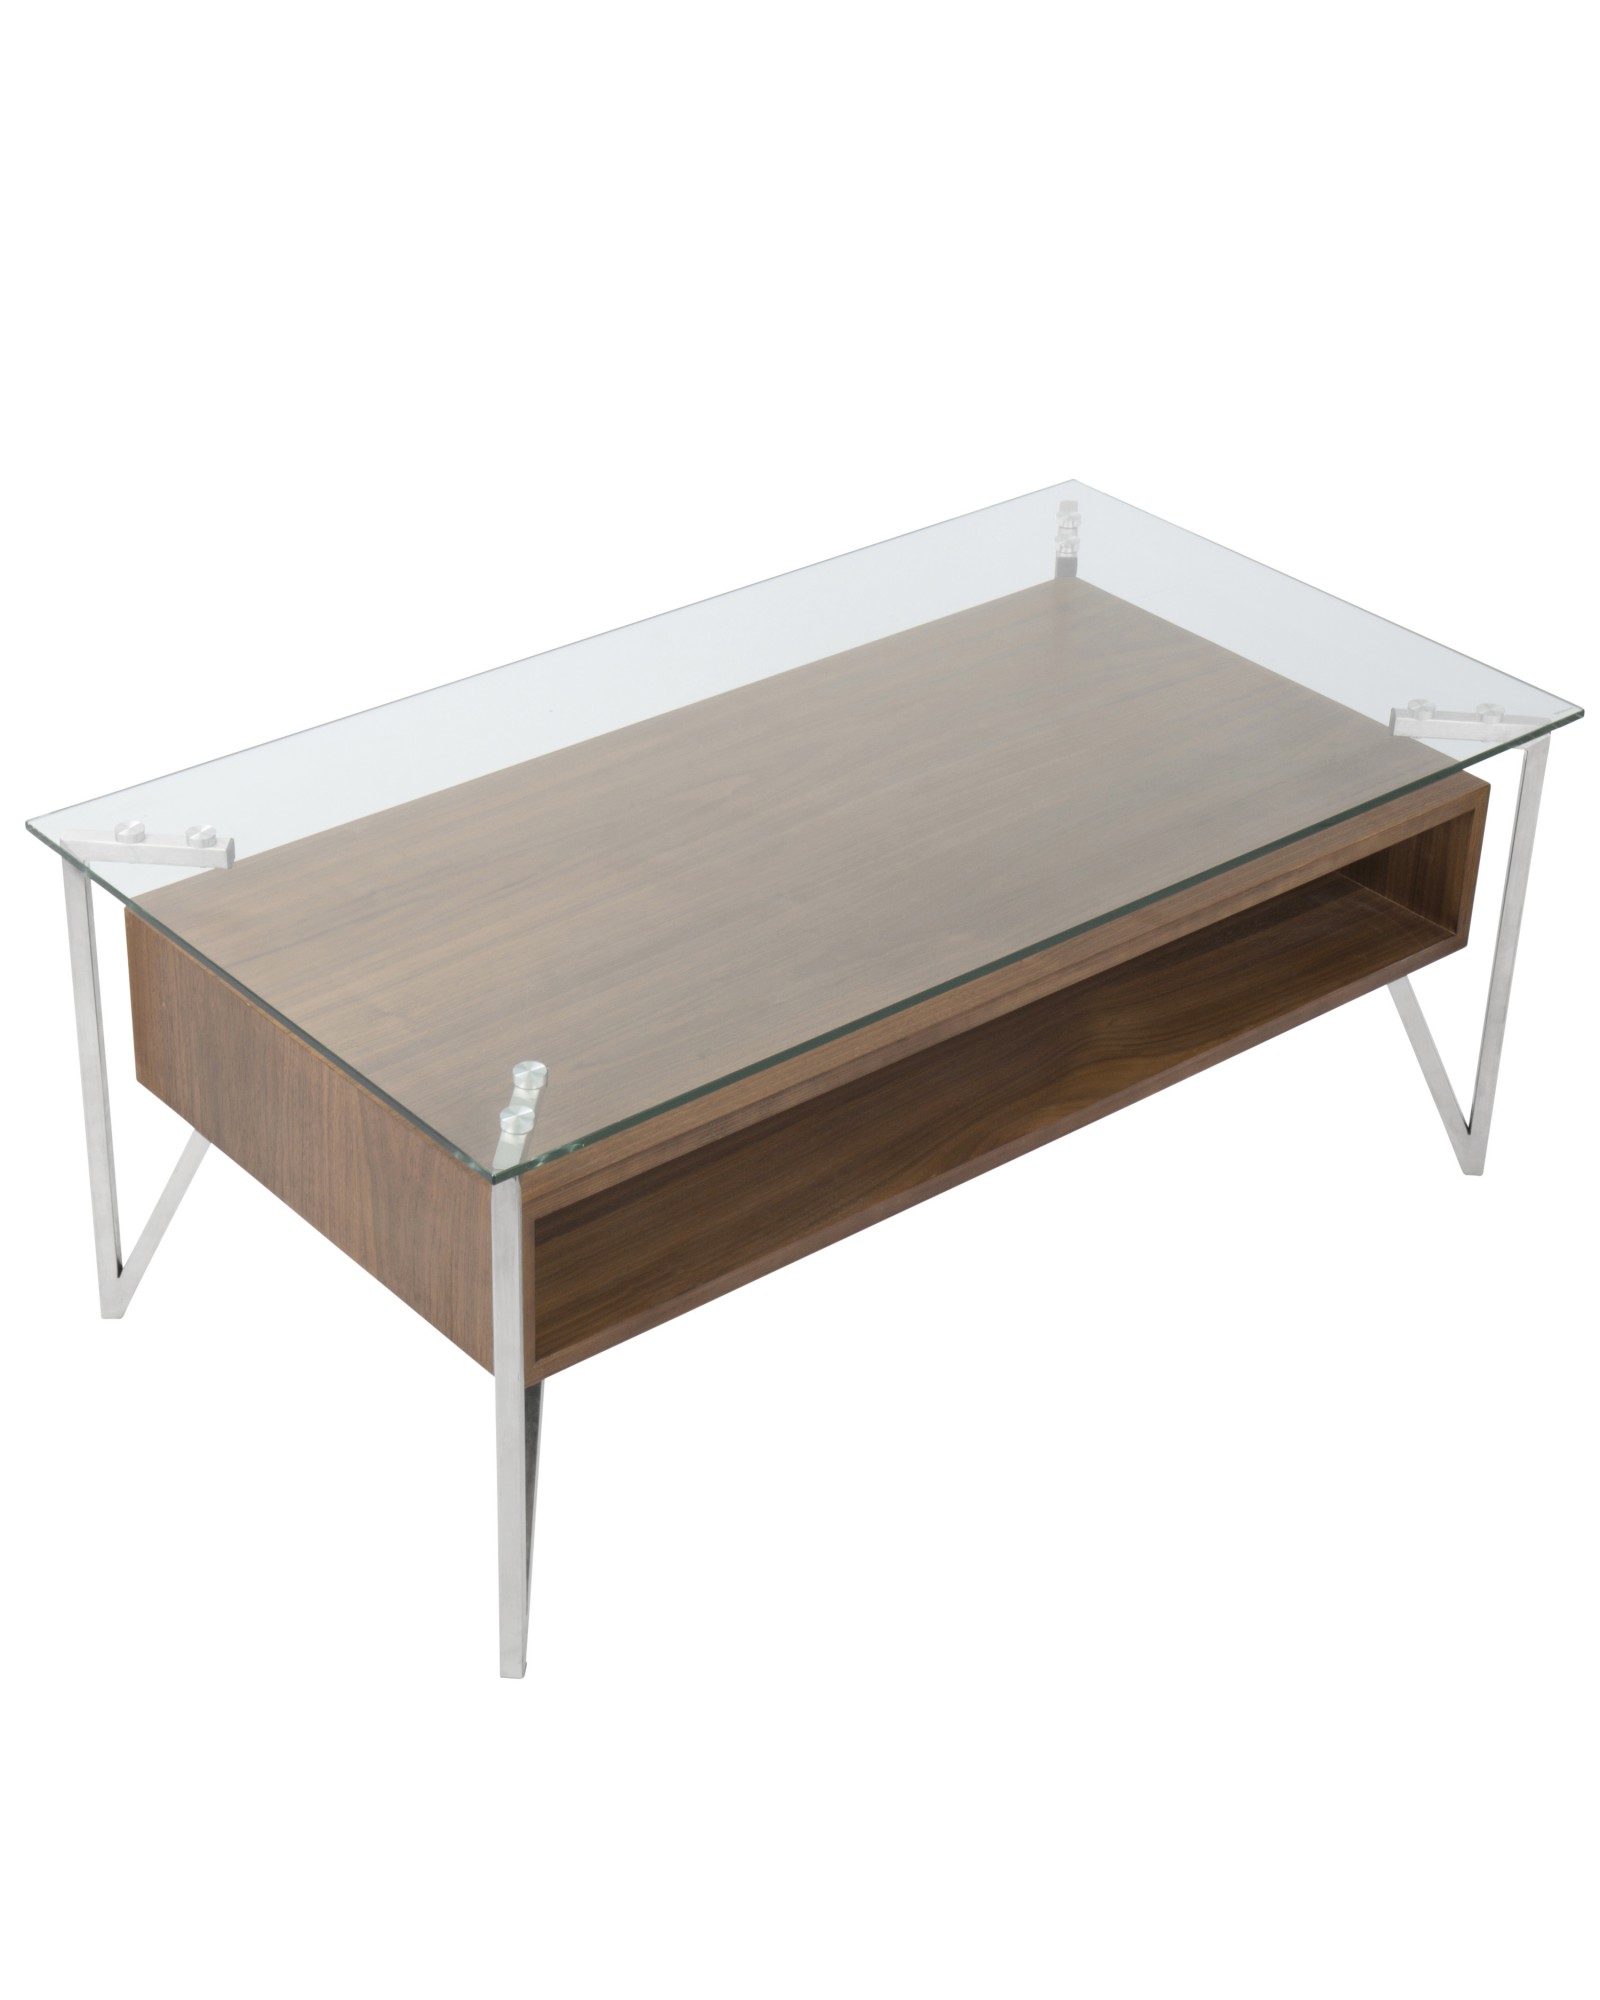 Hover Contemporary Coffee Table with Brushed Stainless Steel Frame, Walnut Wood Shelf, and Clear Glass Top